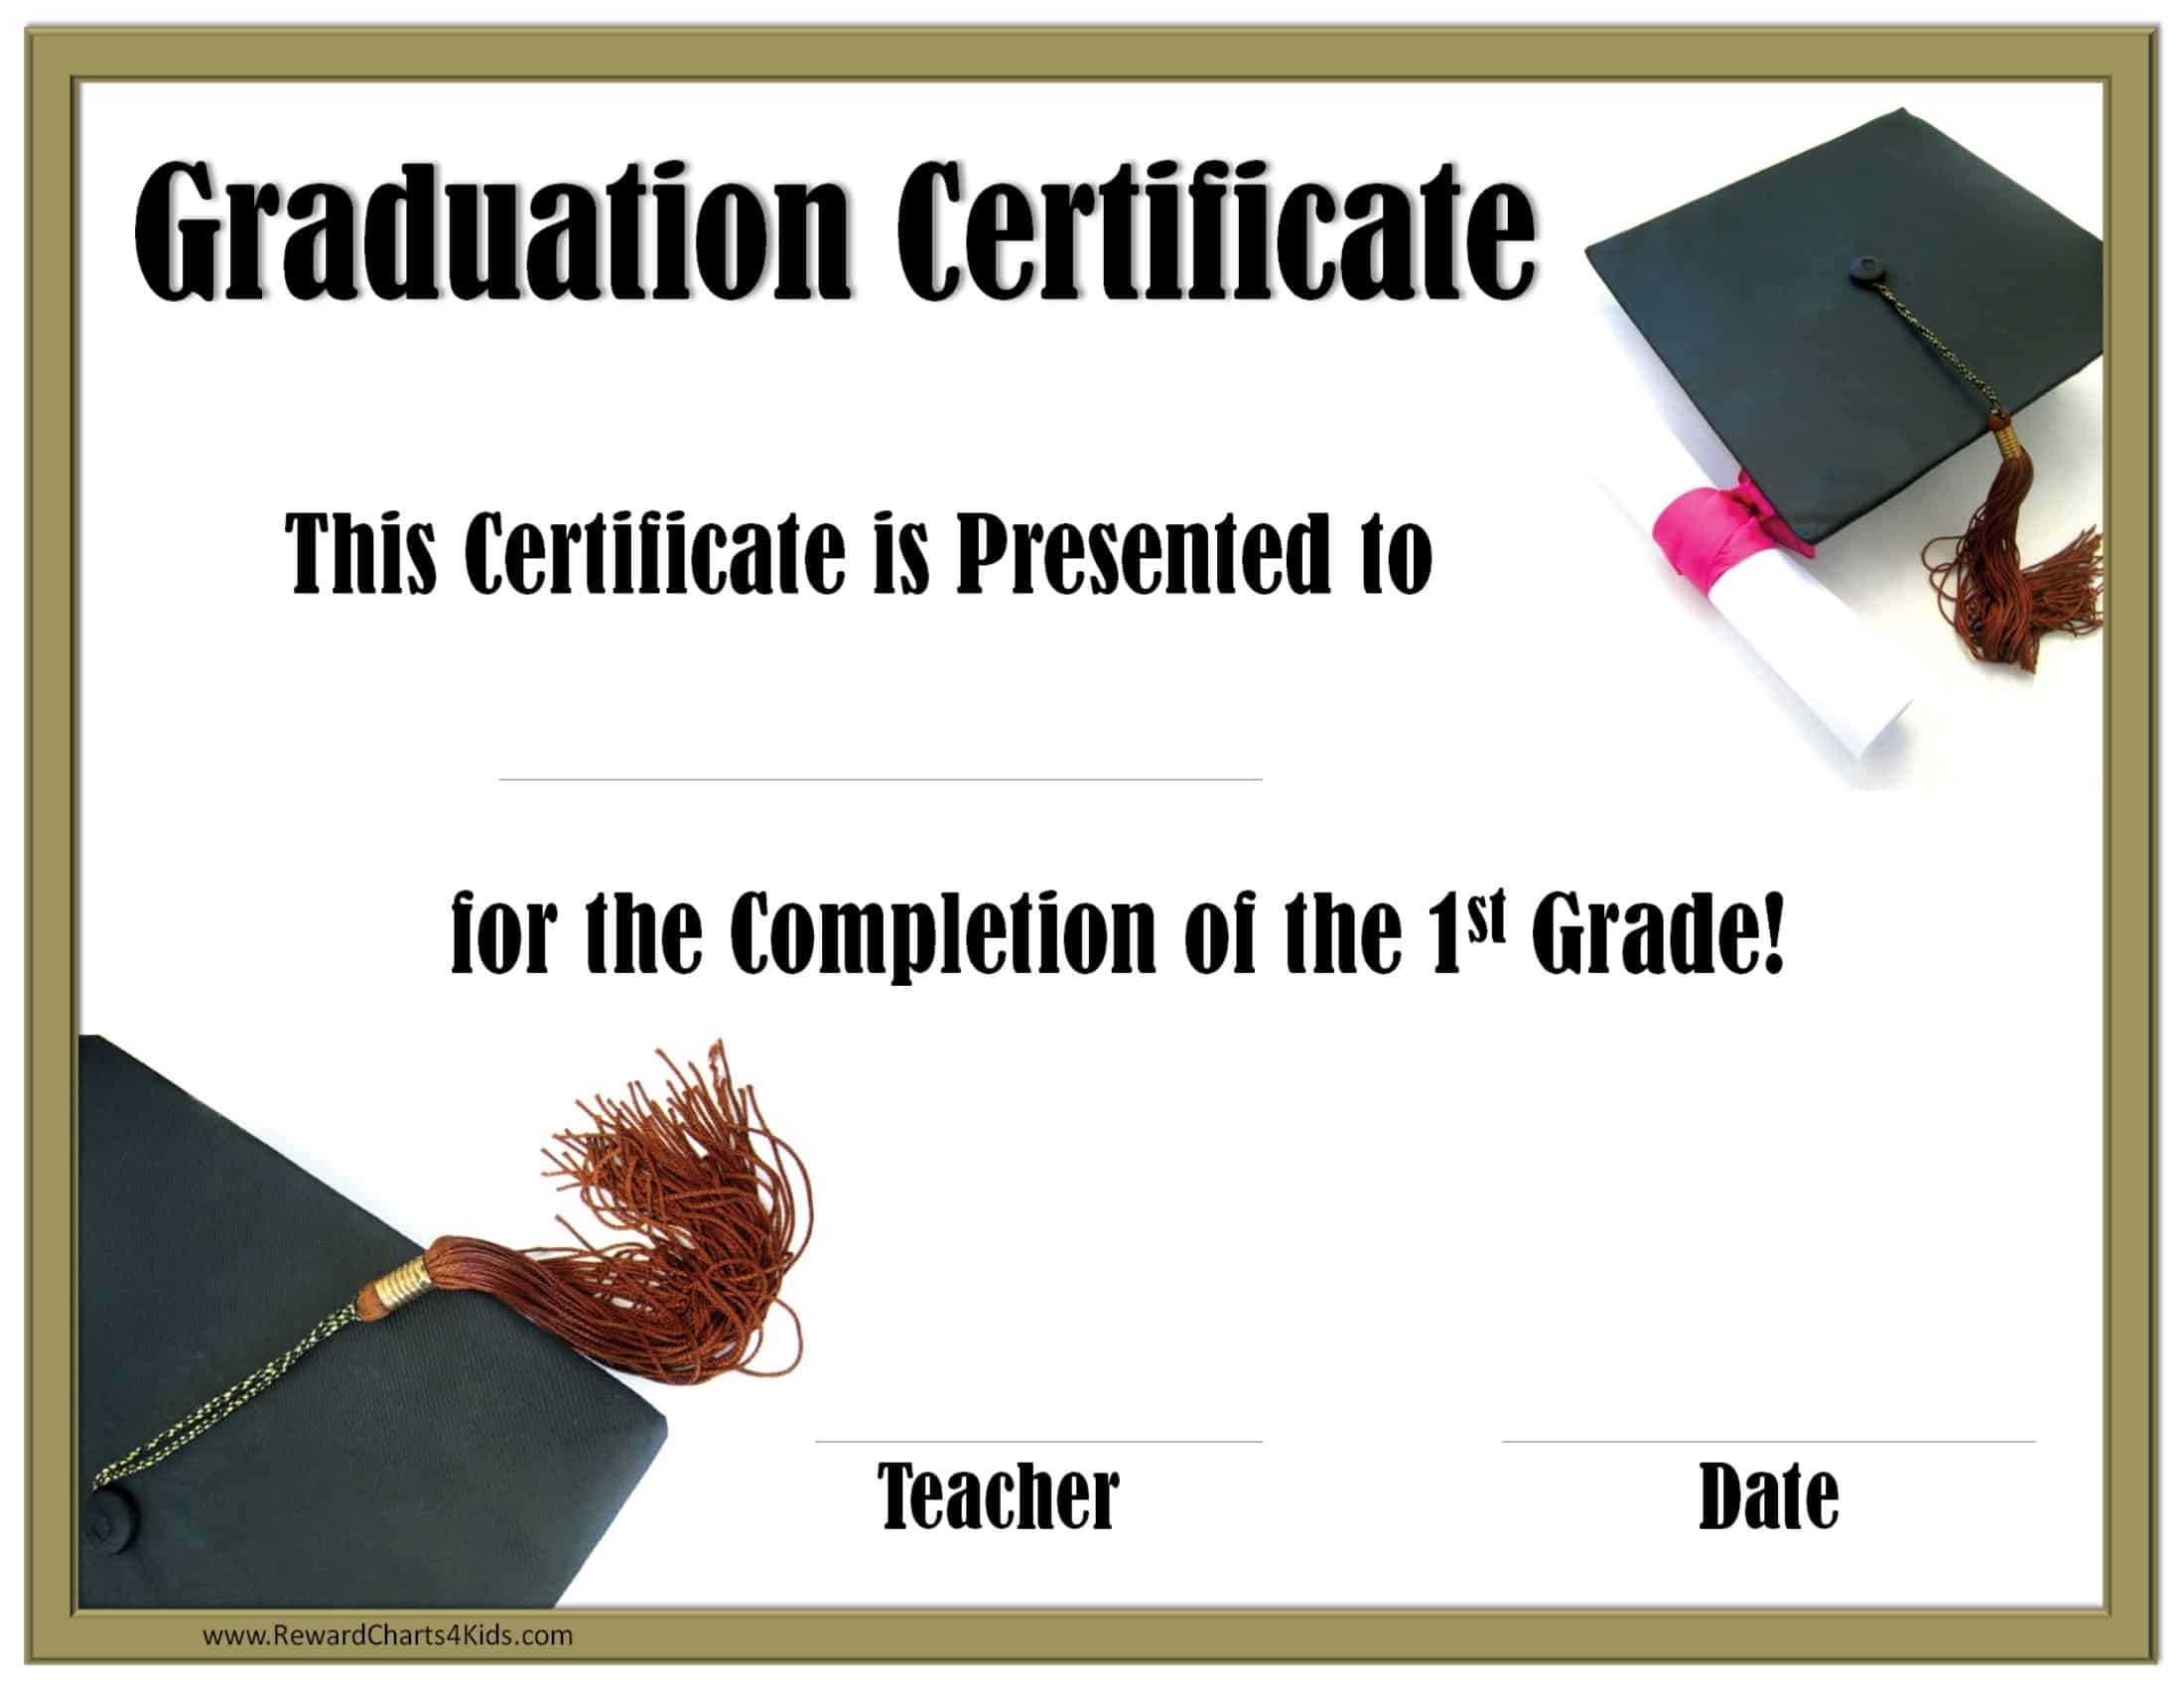 School Graduation Certificates Customize online with or without a photo